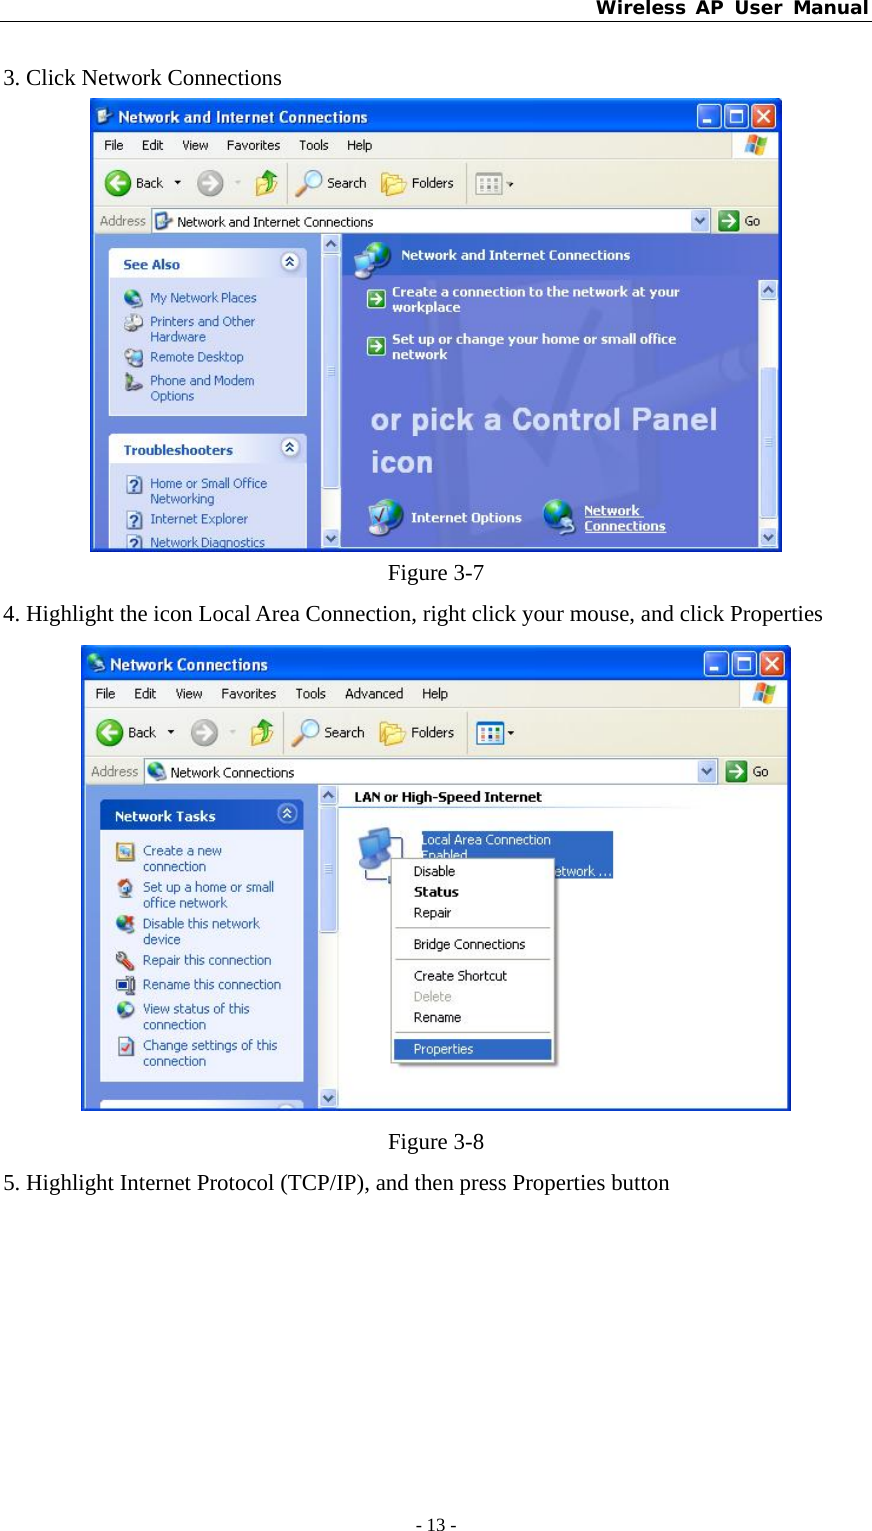 Wireless AP User Manual - 13 -  3. Click Network Connections  Figure 3-7 4. Highlight the icon Local Area Connection, right click your mouse, and click Properties  Figure 3-8 5. Highlight Internet Protocol (TCP/IP), and then press Properties button 